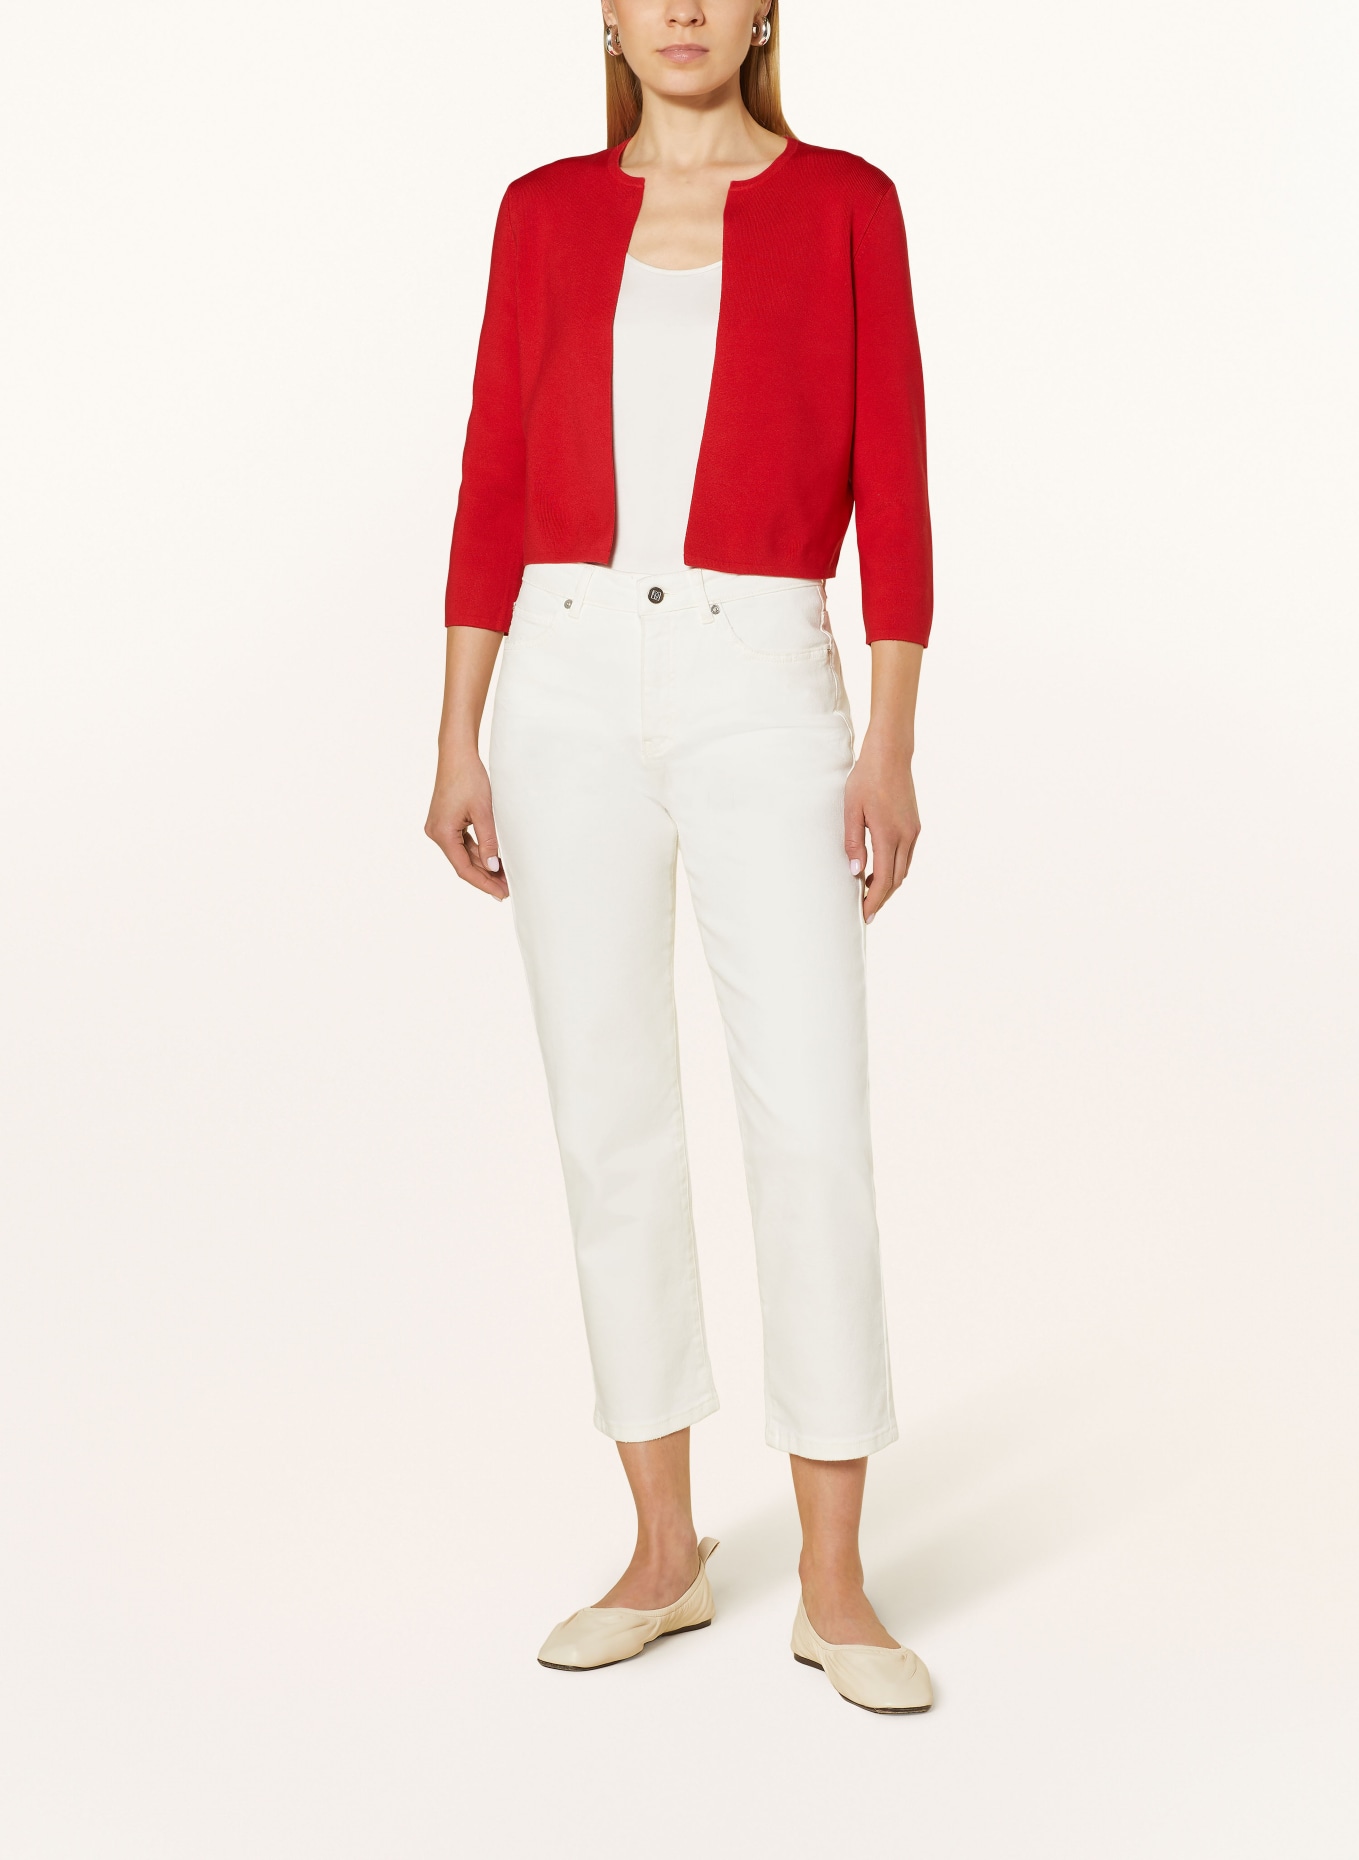 HOBBS Knit bolero ELLA with 3/4 sleeves, Color: RED (Image 2)